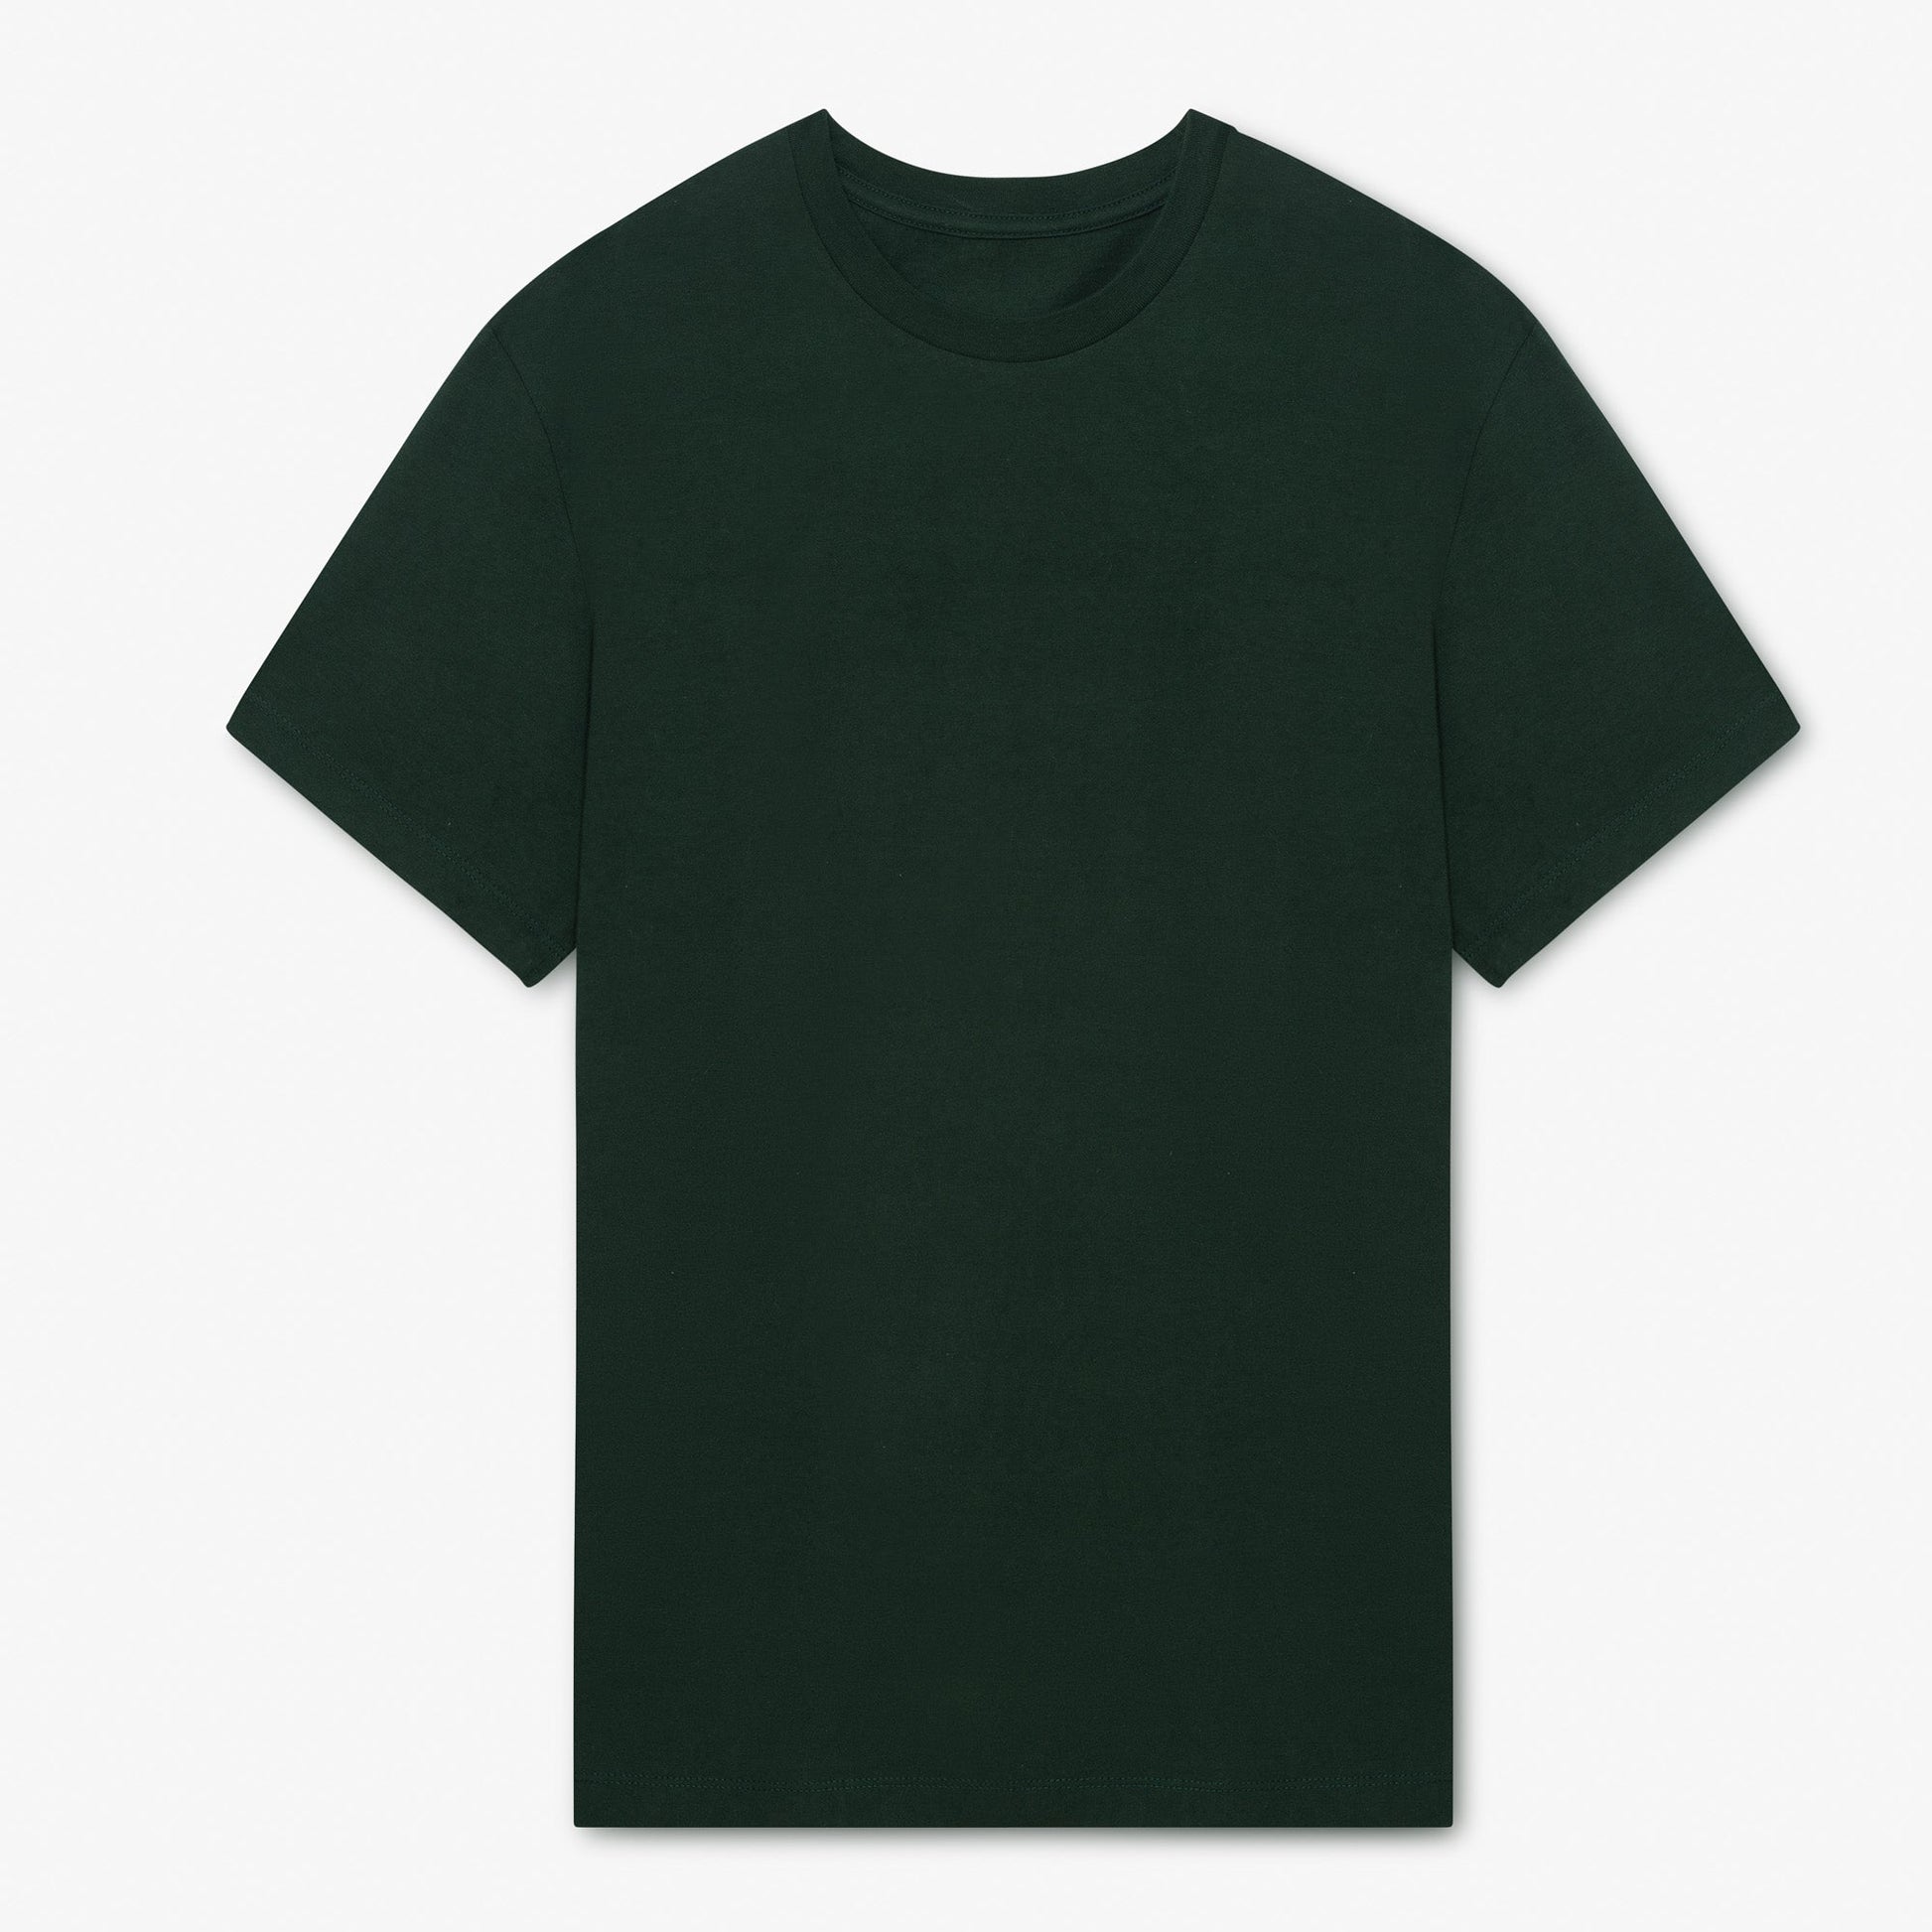 Milo & Dexter Classic cotton t-shirt in olive Fall 23/24